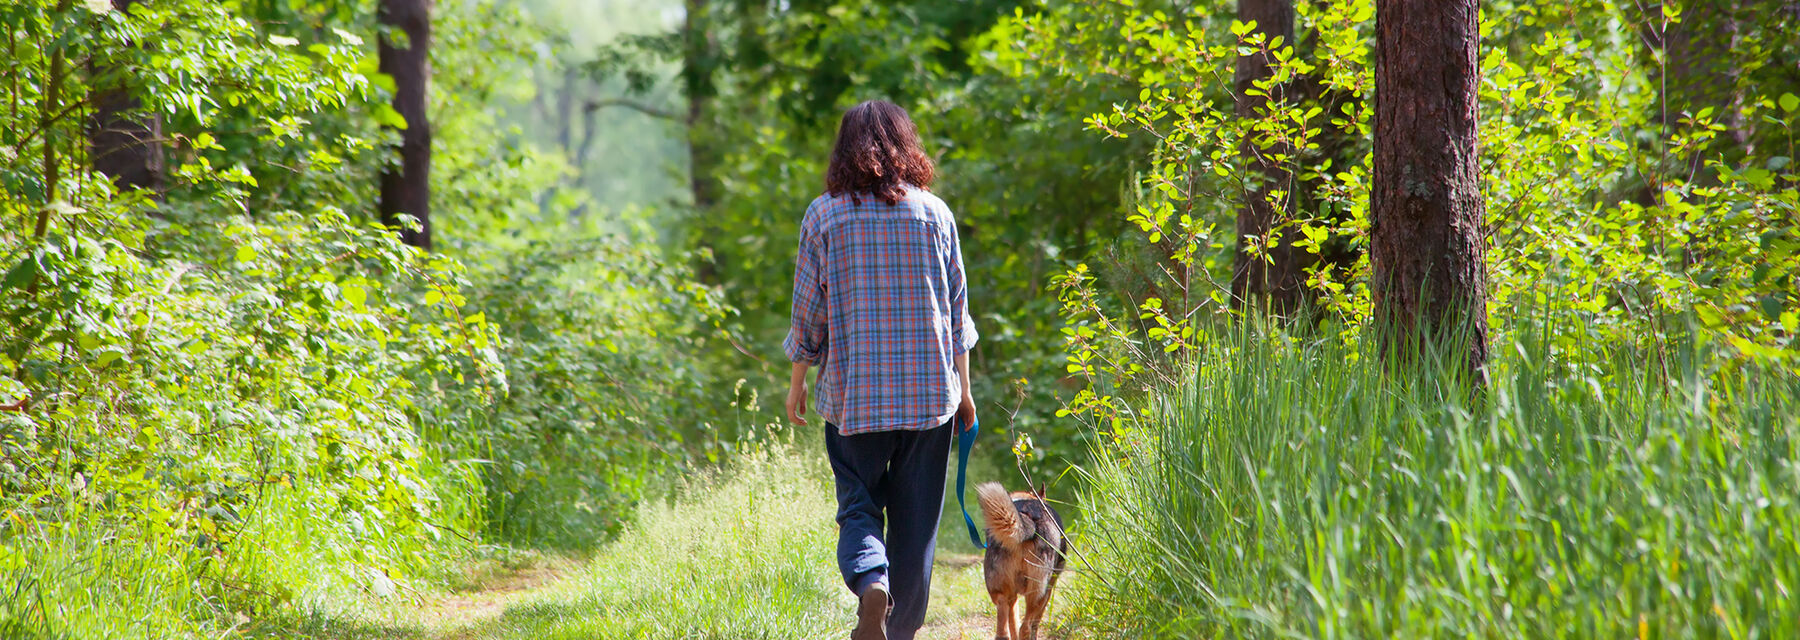 One person walking their dog in a wood